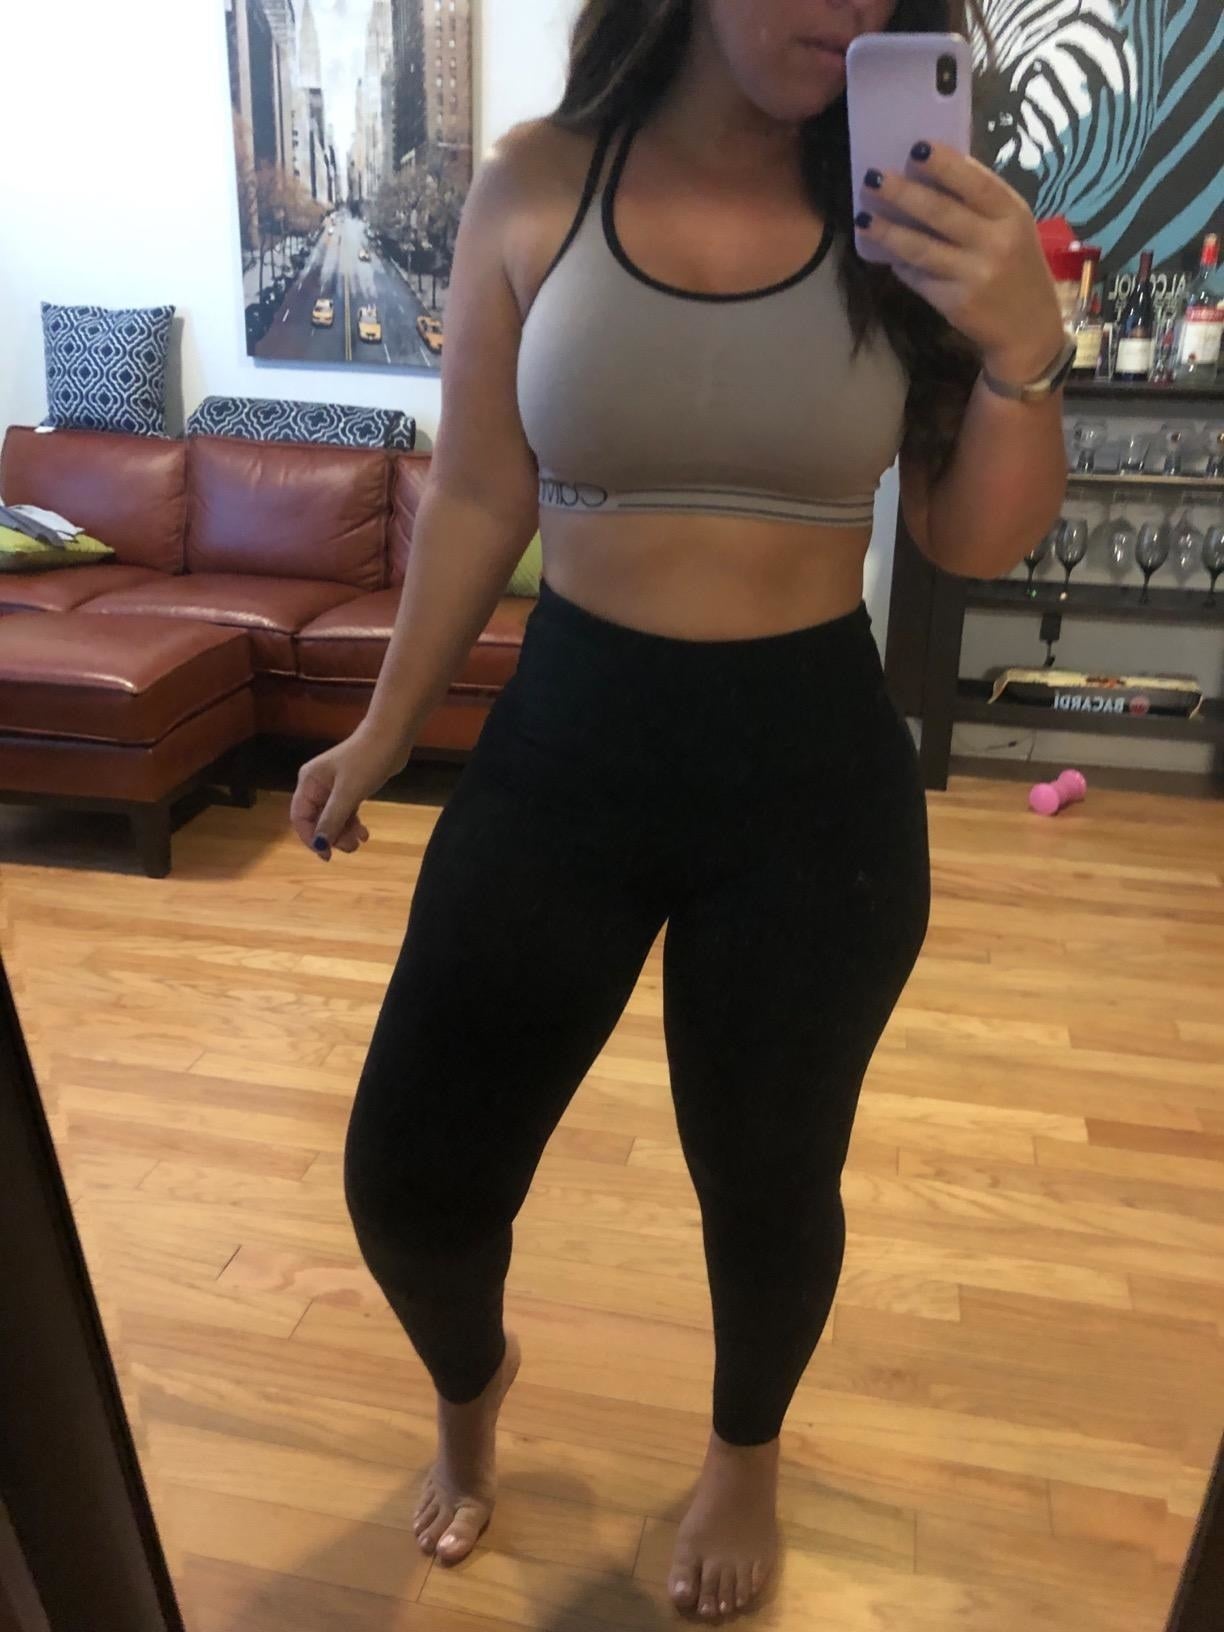 Fabletics - Hate see-through leggings? 🍑Thick, squat-proof